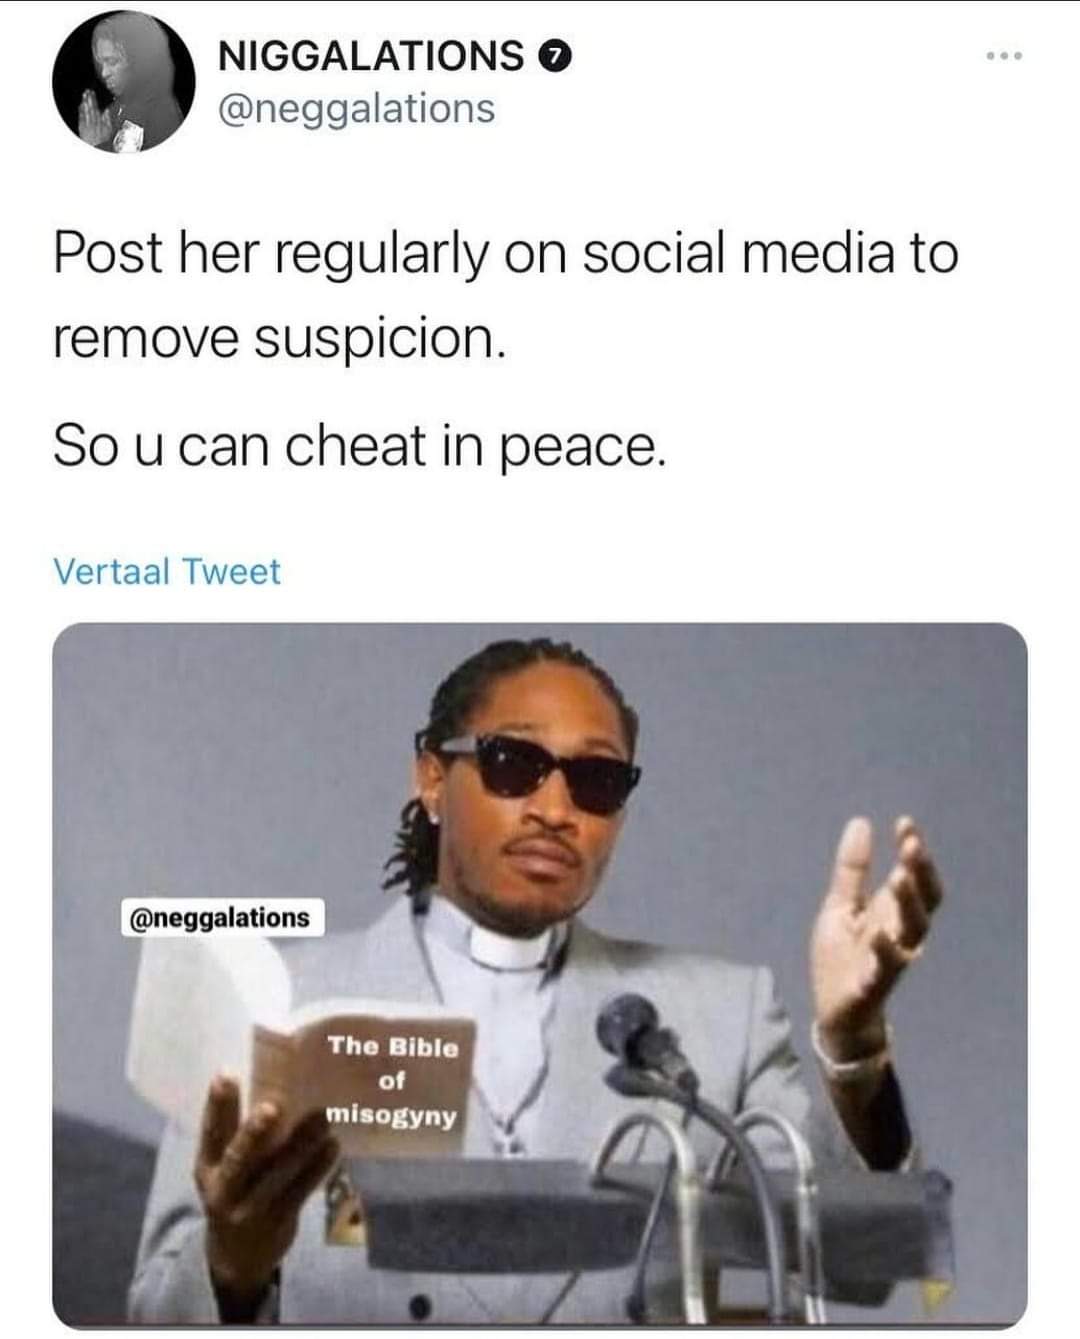 dank memes - streets memes - Niggalations Post her regularly on social media to remove suspicion. Sou can cheat in peace. Vertaal Tweet The Bible of misogyny